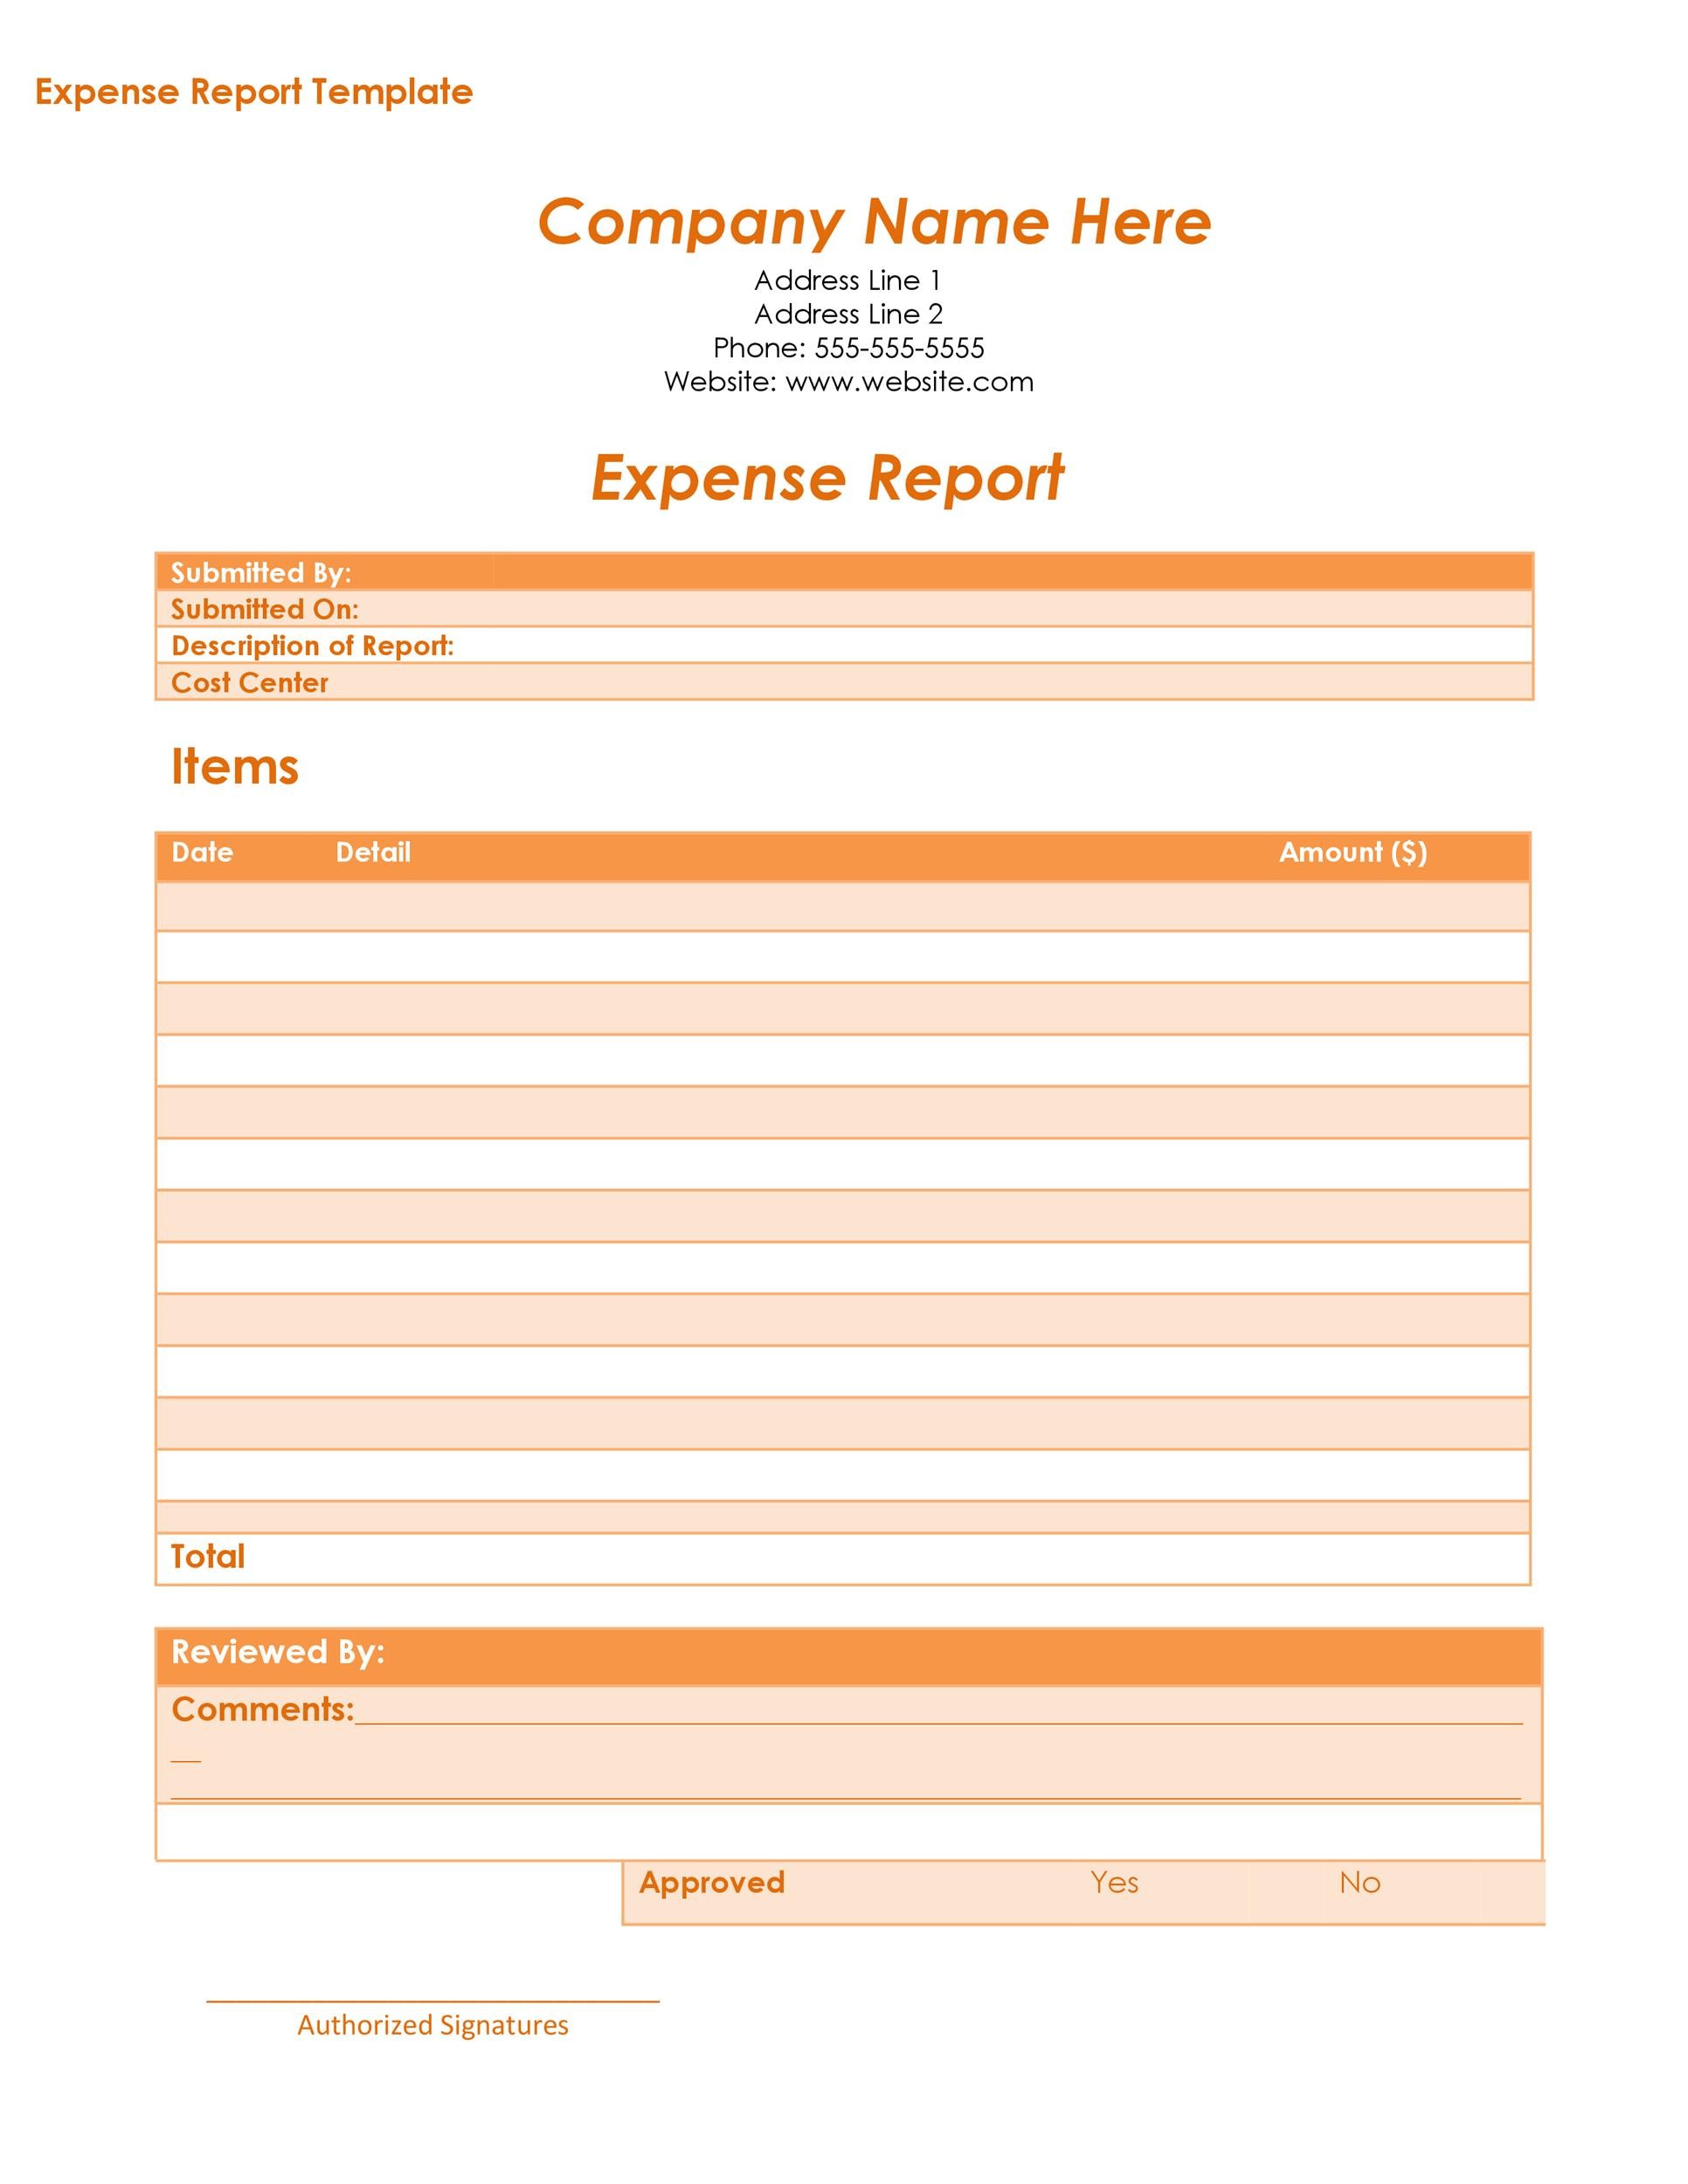 40+ Expense Report Templates to Help you Save Money ᐅ ...